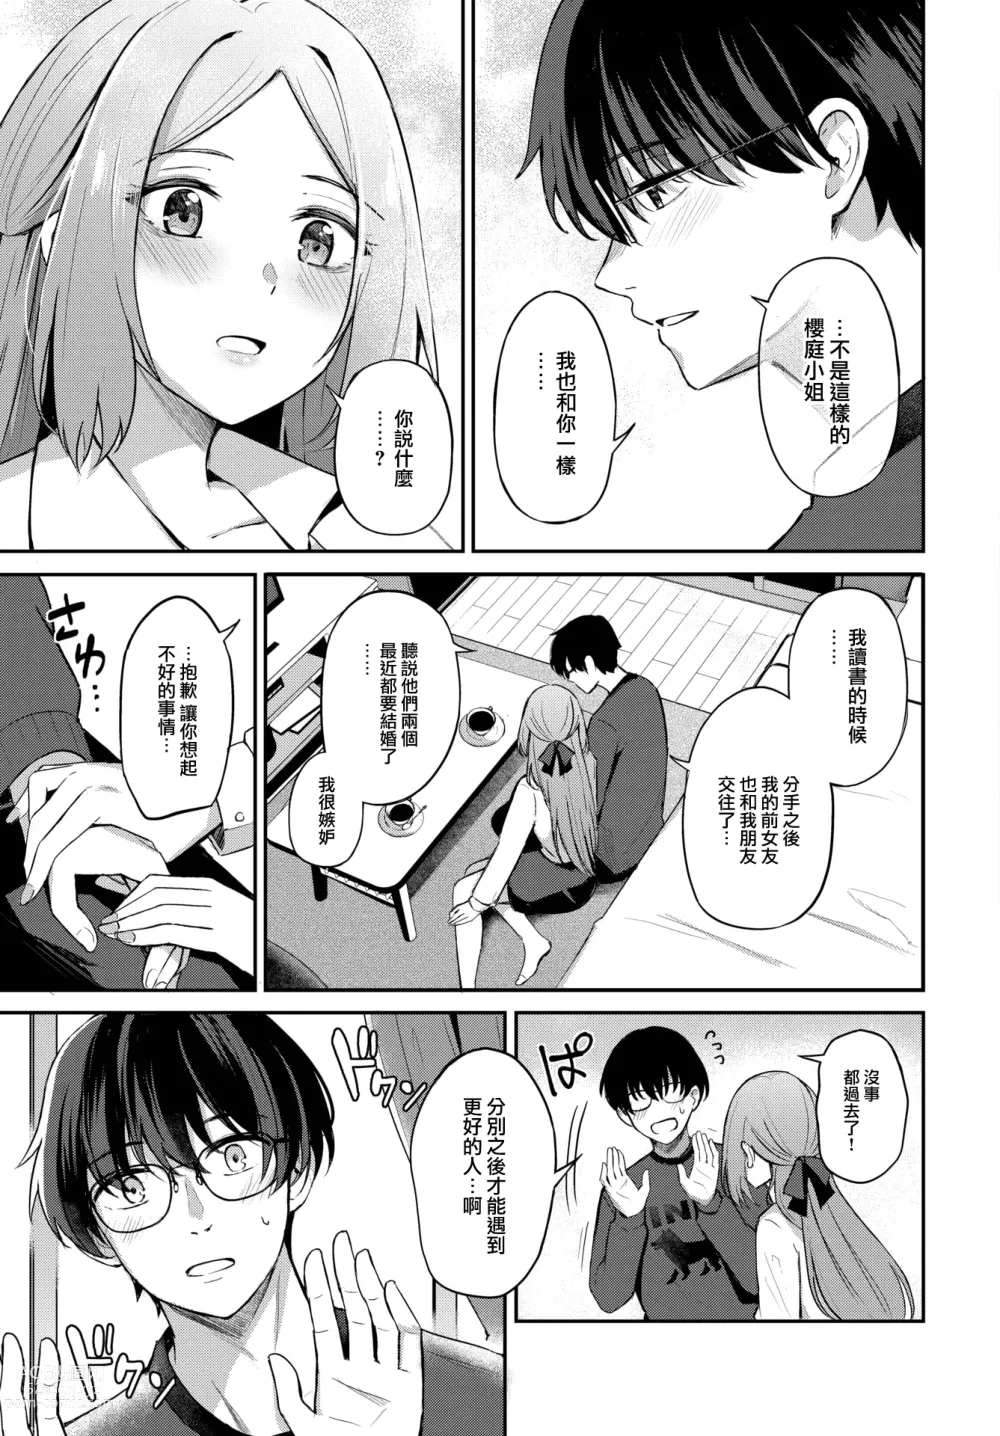 Page 8 of manga Nigakute Amai Coffee no you ni - Its fragrance is very special...